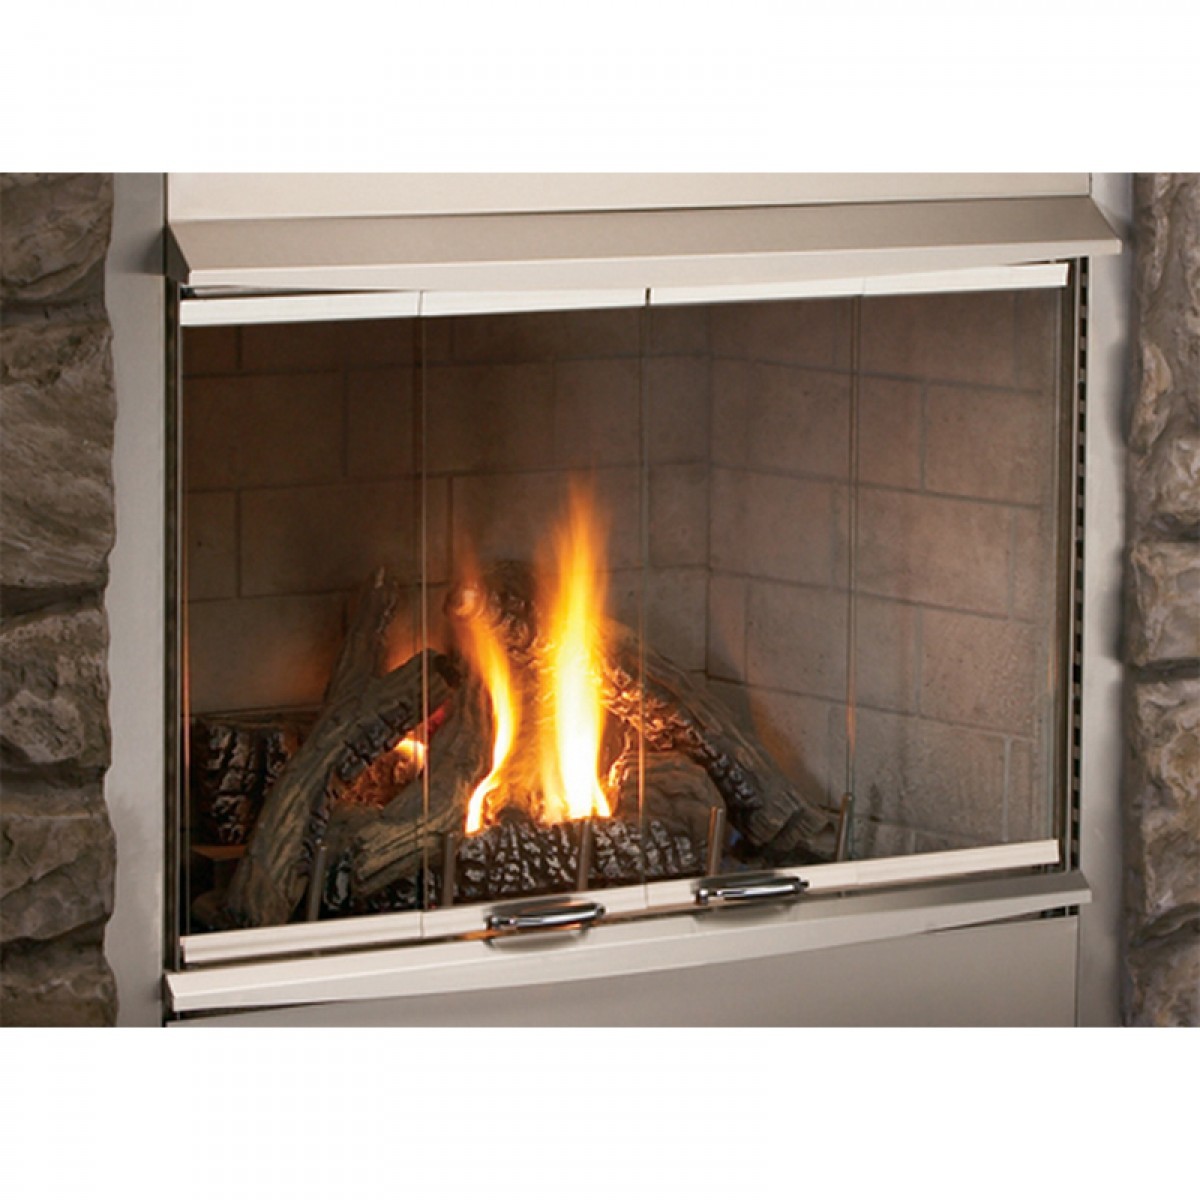 Mendota Gas Fireplace Insert Reviews Awesome Part 5 Electric Fireplace Reviews Consumer Reports